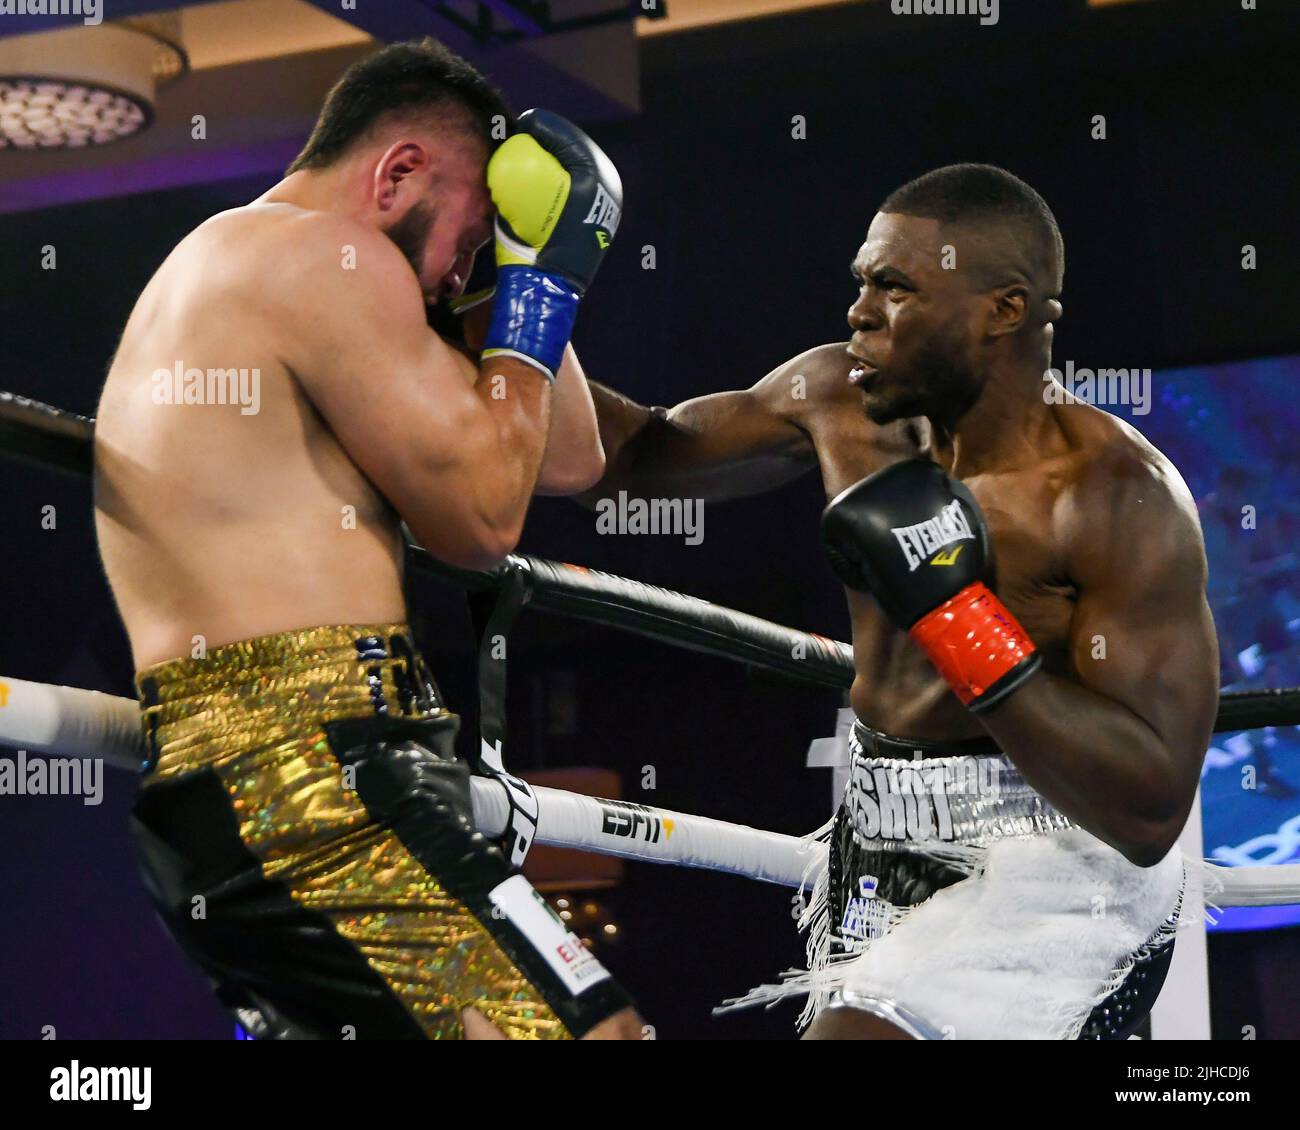 Menifee, California, USA. 15th July, 2022. 07 - 15 - 22 ESPN Top Rank Boxing:  .Stephan Shaw and Bernardo Marquez exchange punches during the 8 rounds,  heavyweight bout. Penchanga Resort and Casino.